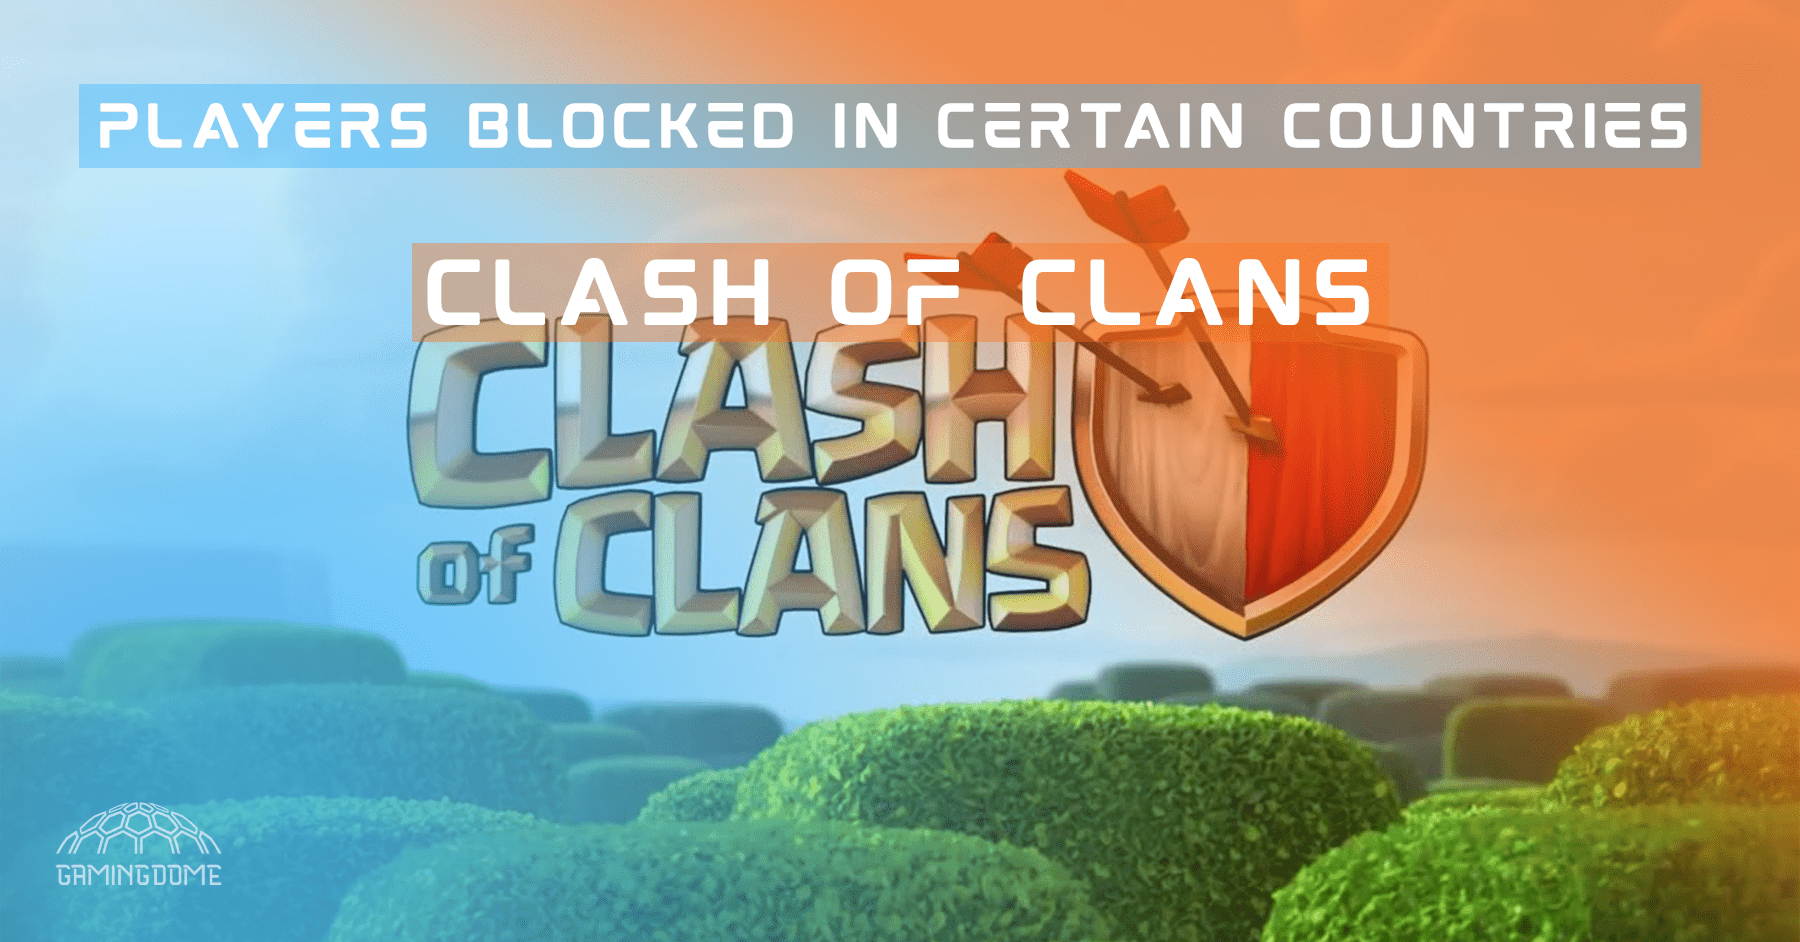 Clash of Clans Players Blocked in Certain Countries